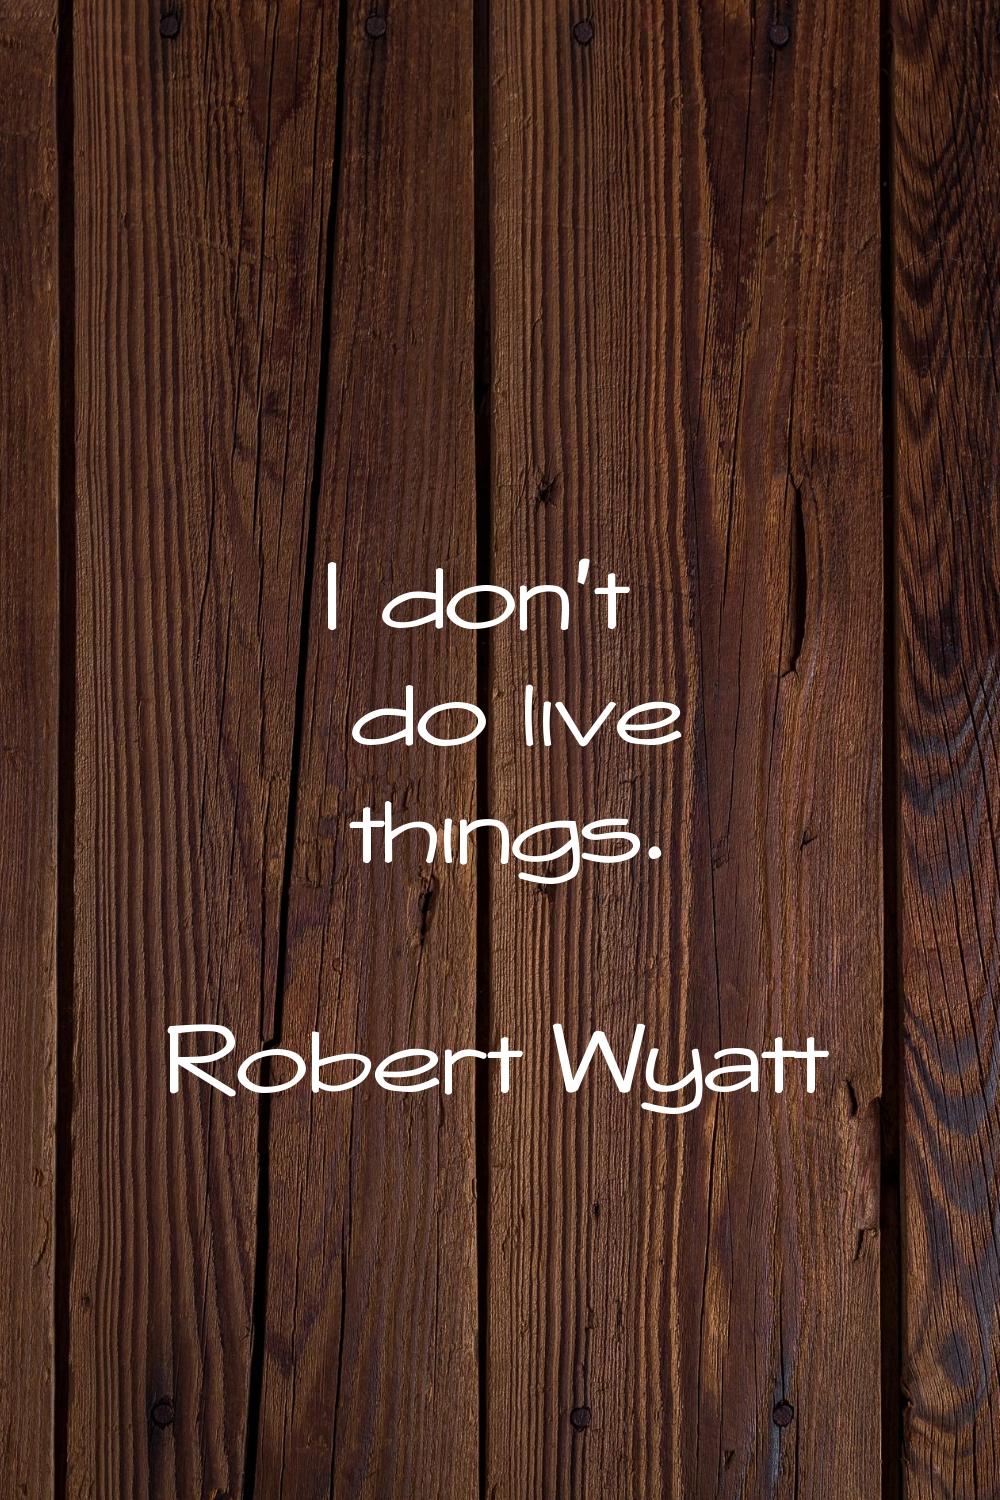 I don't do live things.